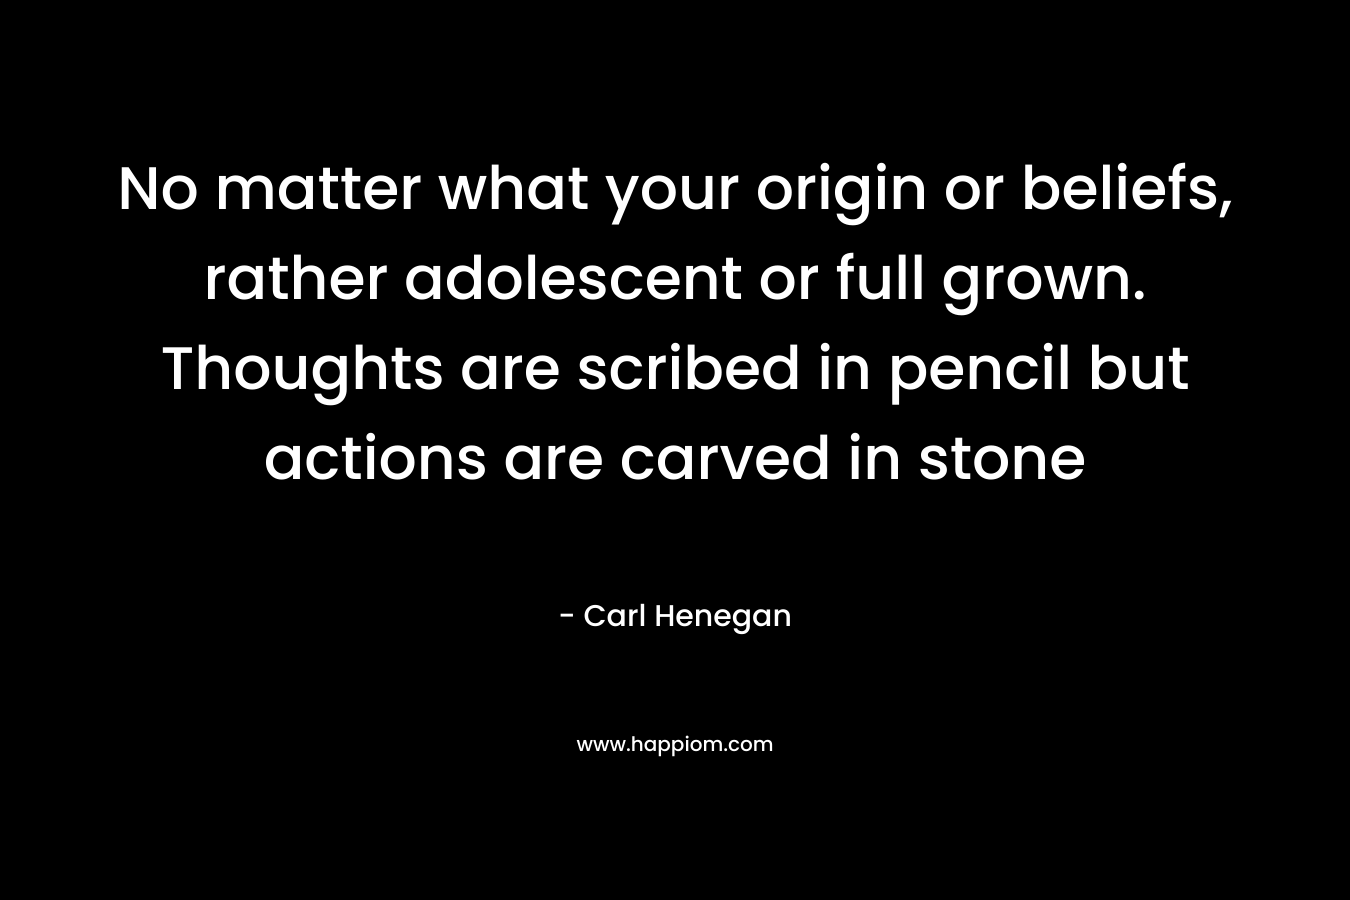 No matter what your origin or beliefs, rather adolescent or full grown. Thoughts are scribed in pencil but actions are carved in stone